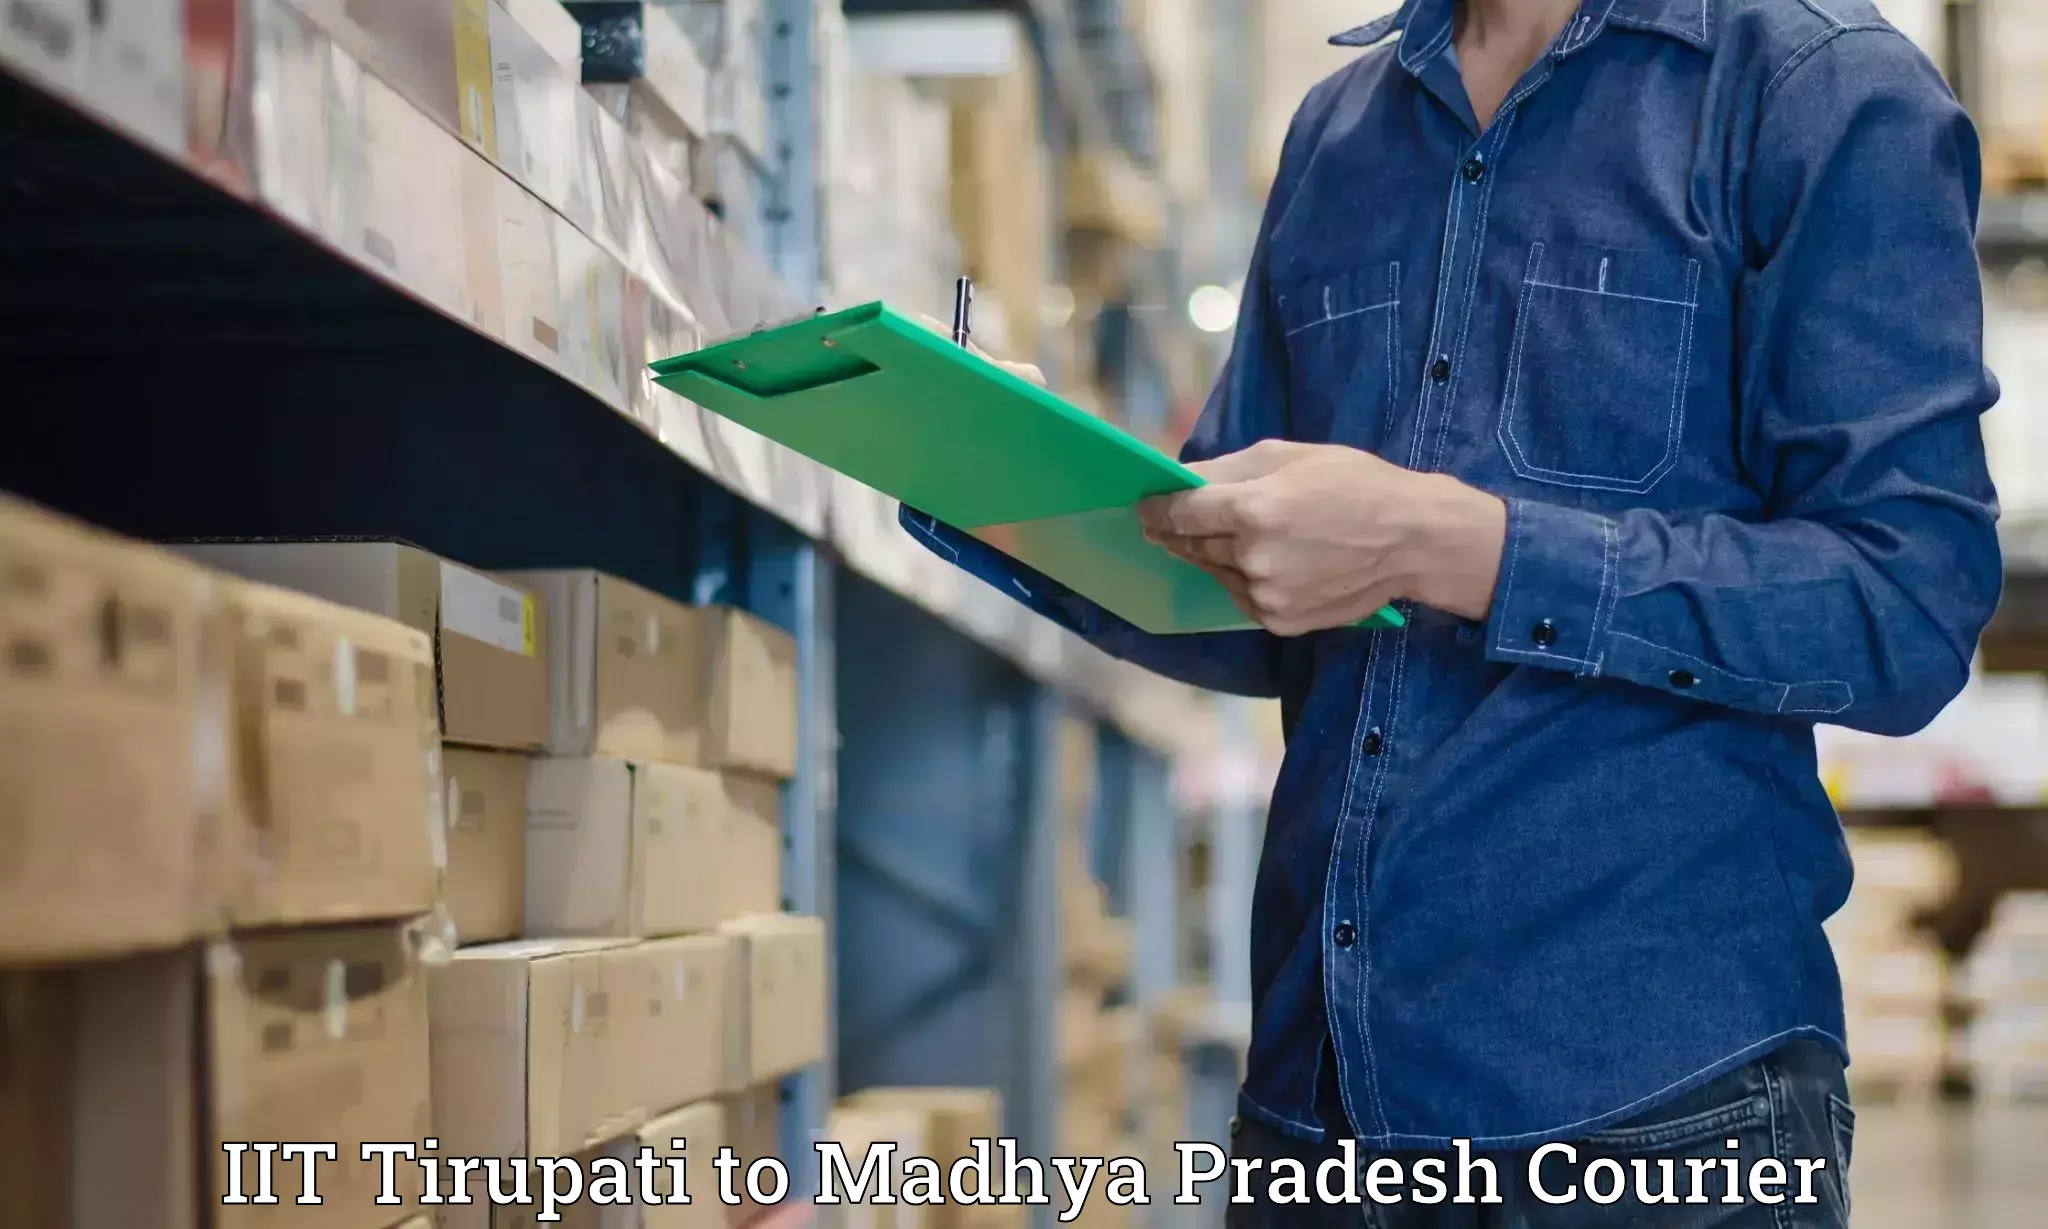 Next-generation courier services IIT Tirupati to Indore